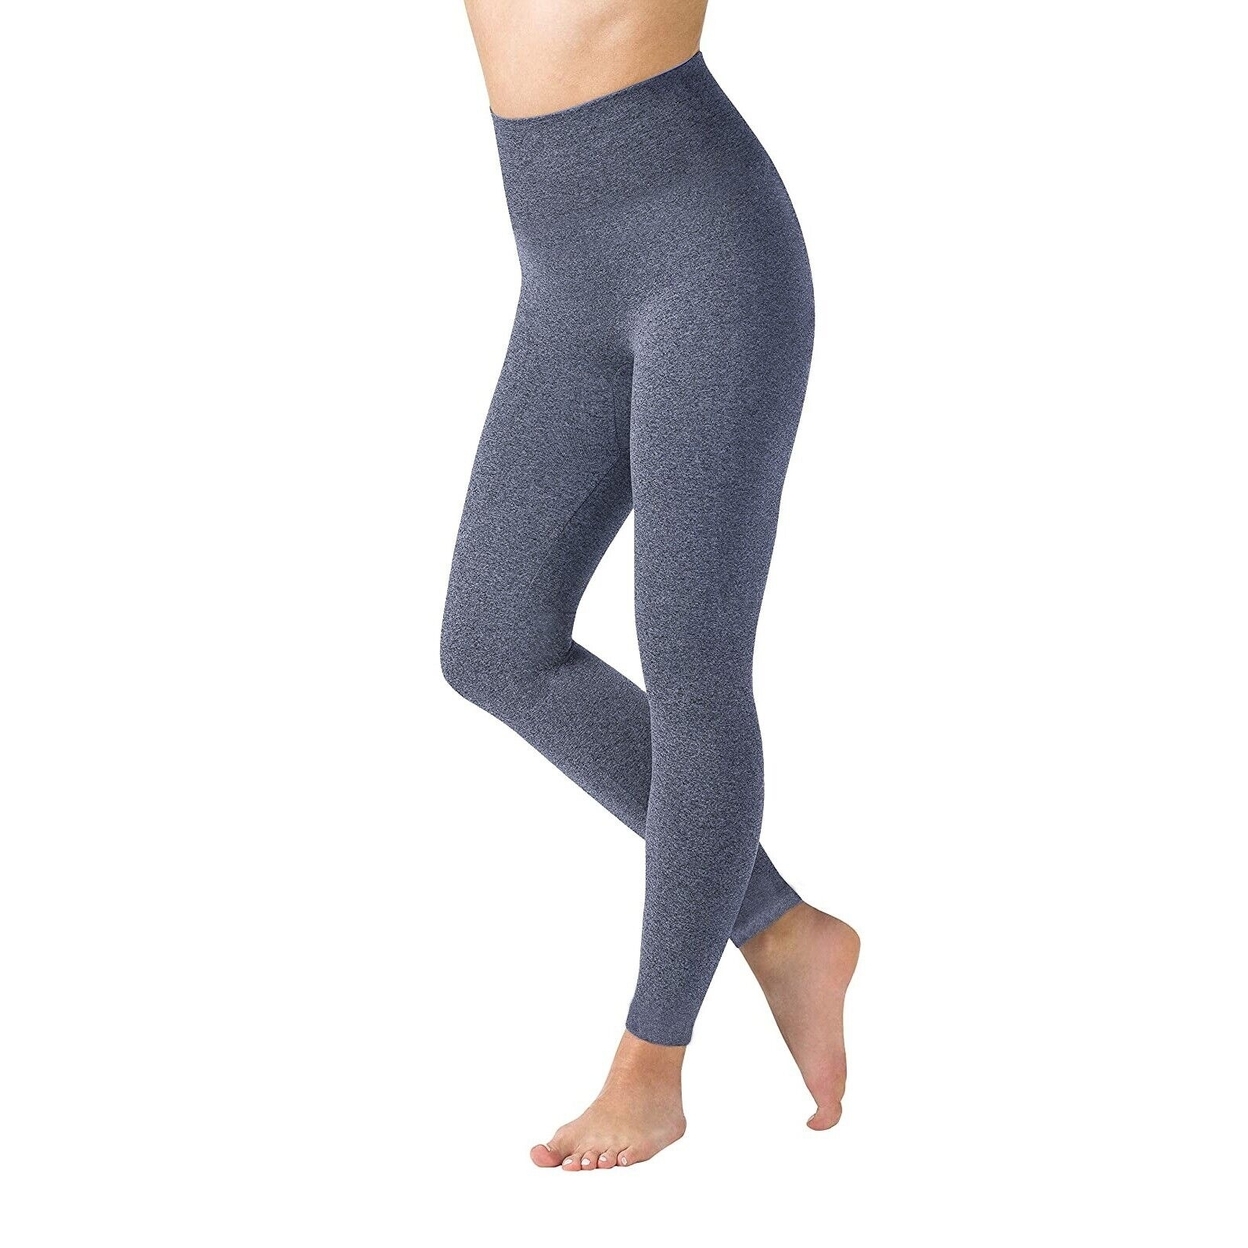 Multi-Packs Women High Waisted Fleece Lined Marled Leggings Ultra Soft Warm Pant - Charcoal/charcoal, 2, Small